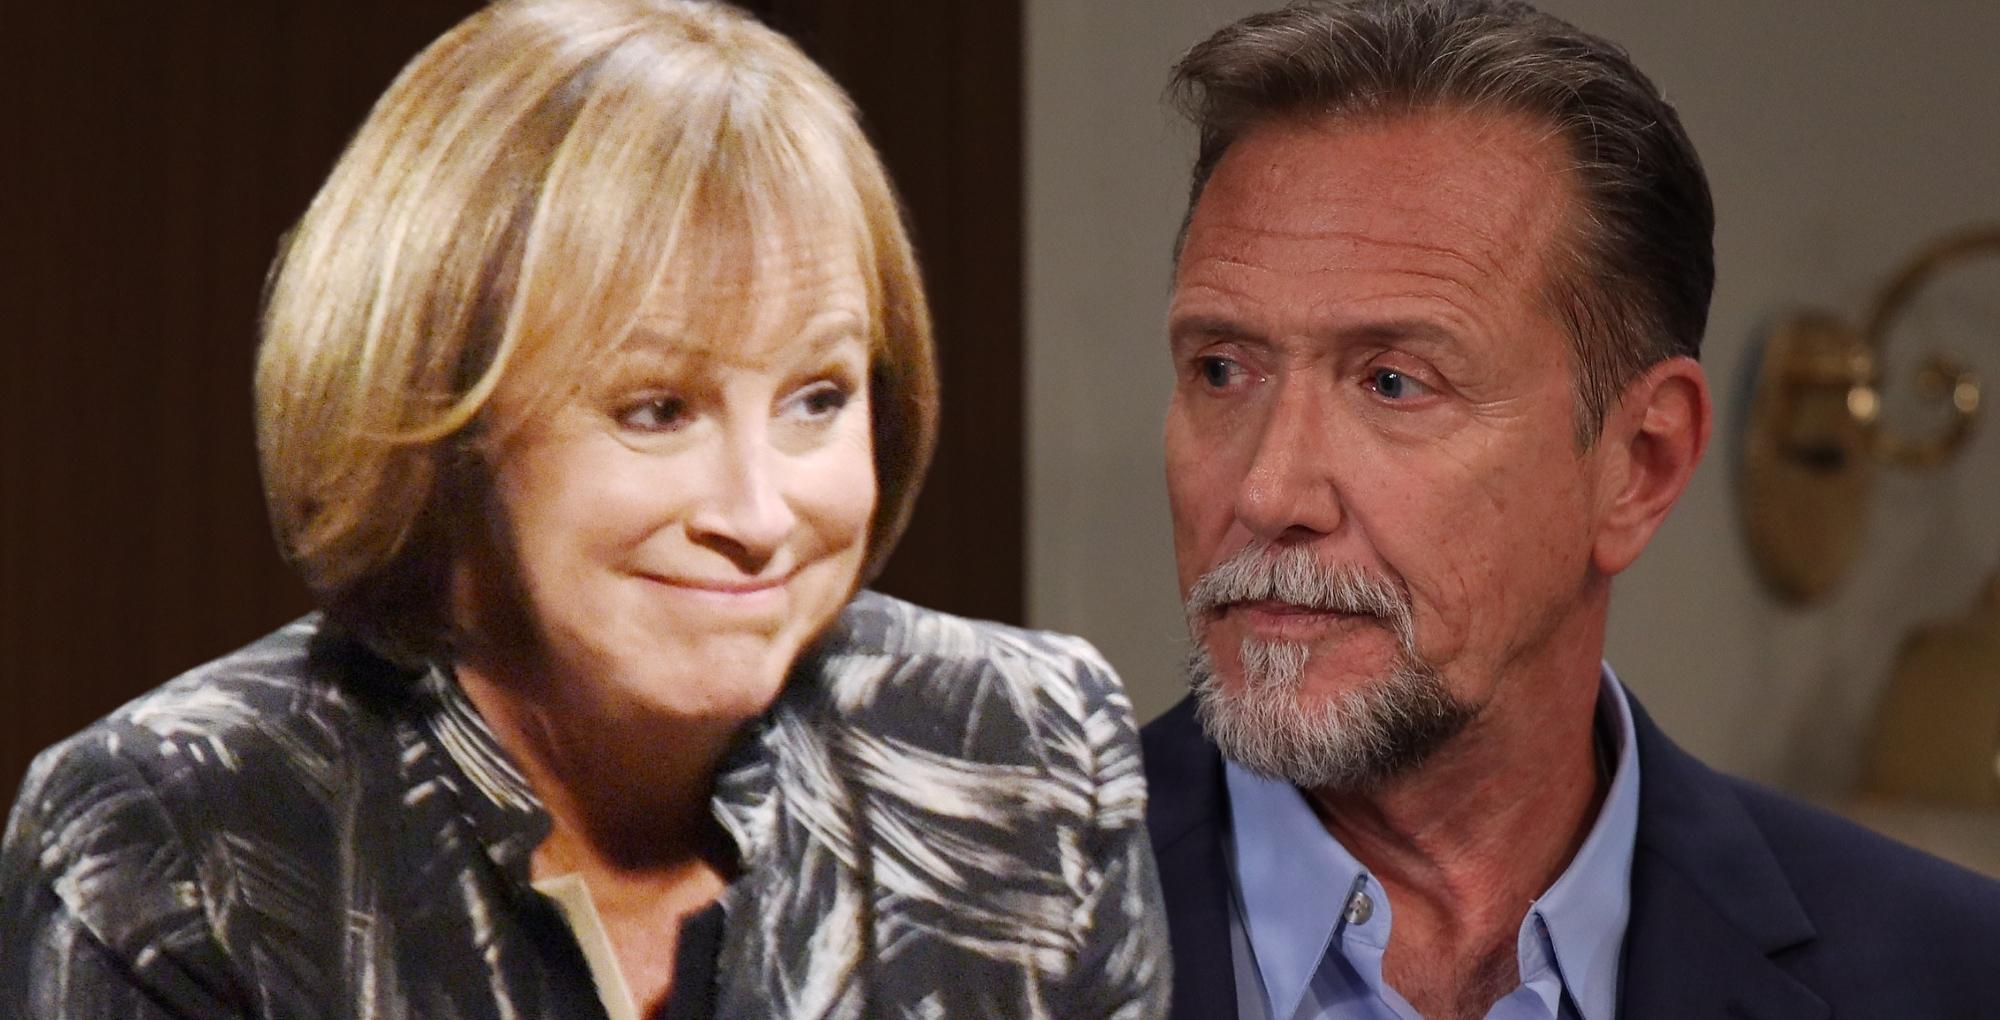 nora buchanan and jackson montgomery are familiar faces popping up on general hospital.